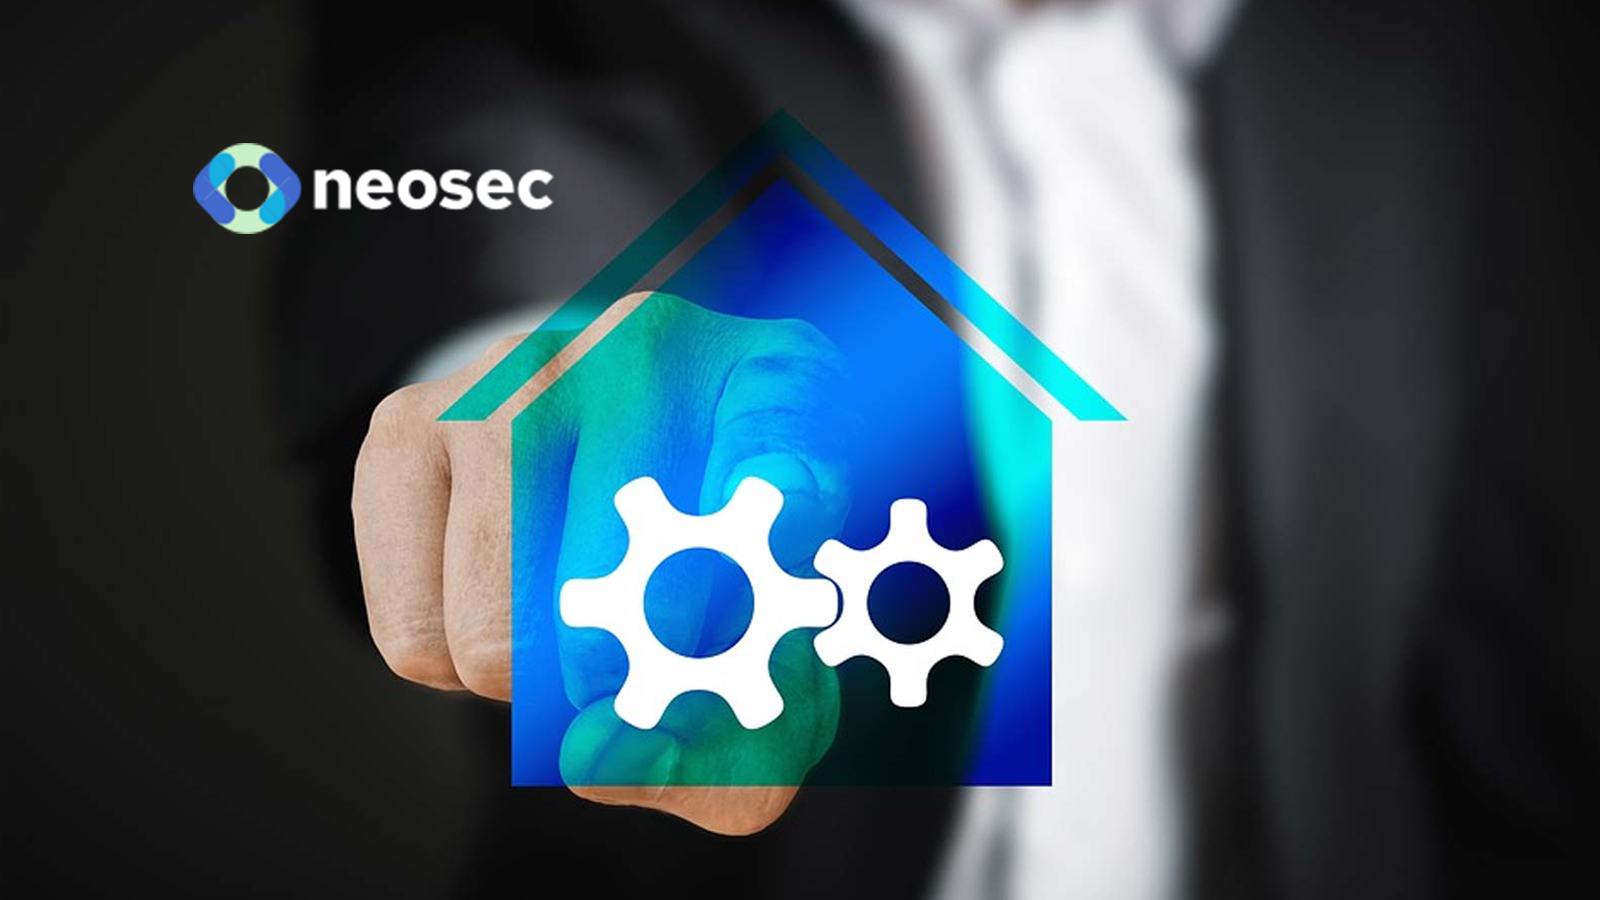 Neosec Introduces Automated Tokenization to Enable Full API Visibility Without Exposure of Sensitive Data